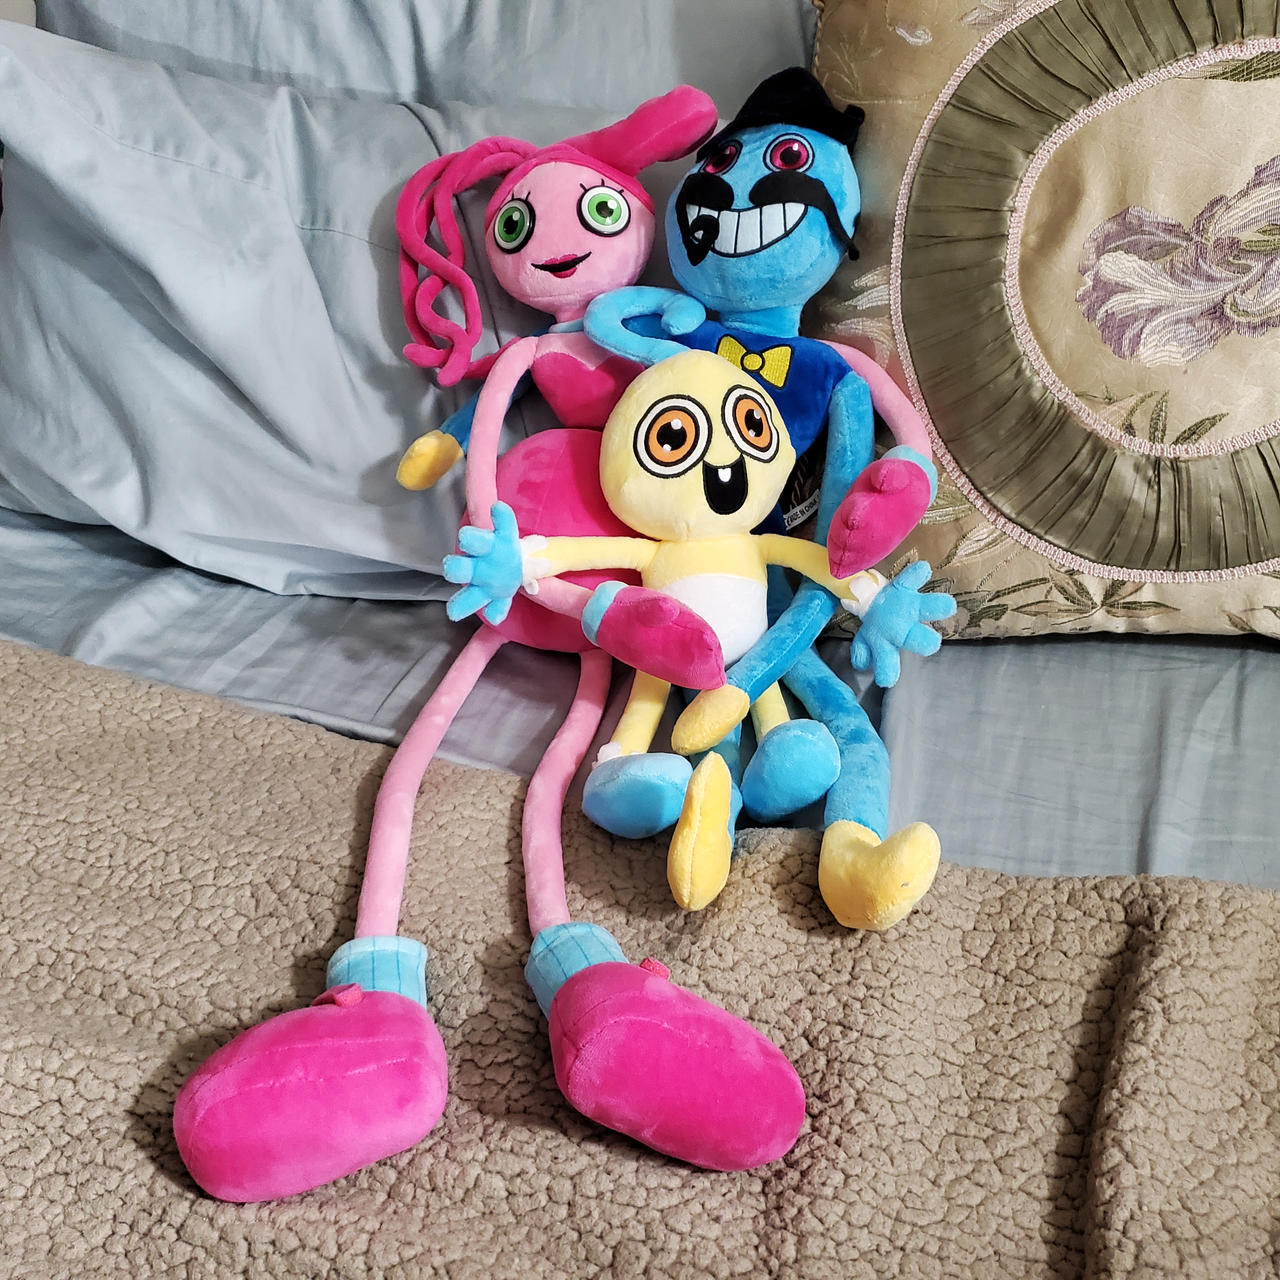 Mommy Long Legs and Family Plush Doll set photo 1 by BerryViolet on  DeviantArt